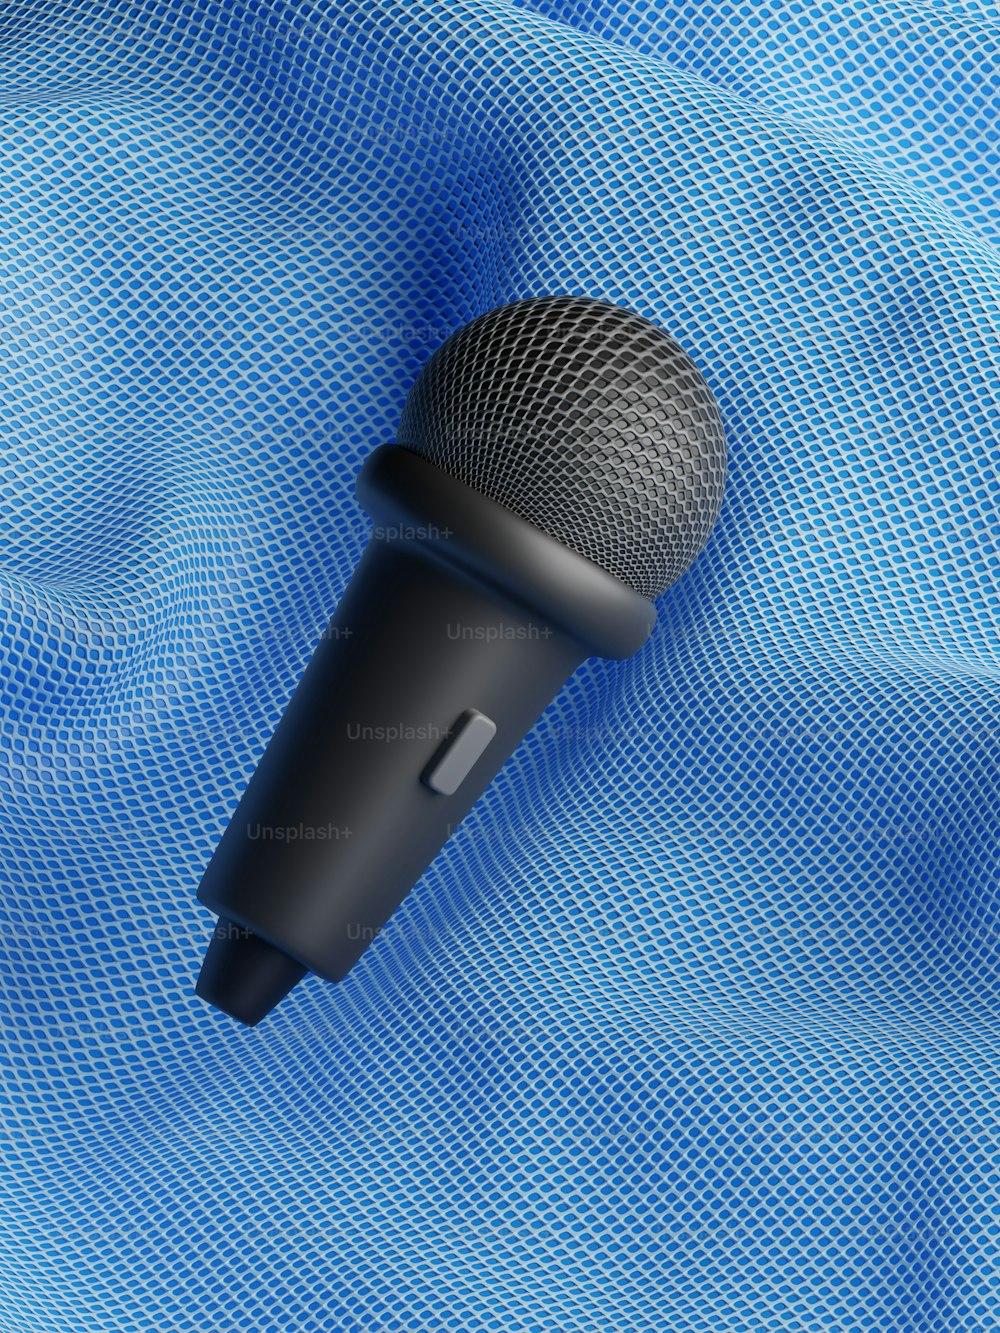 blue colored microphones